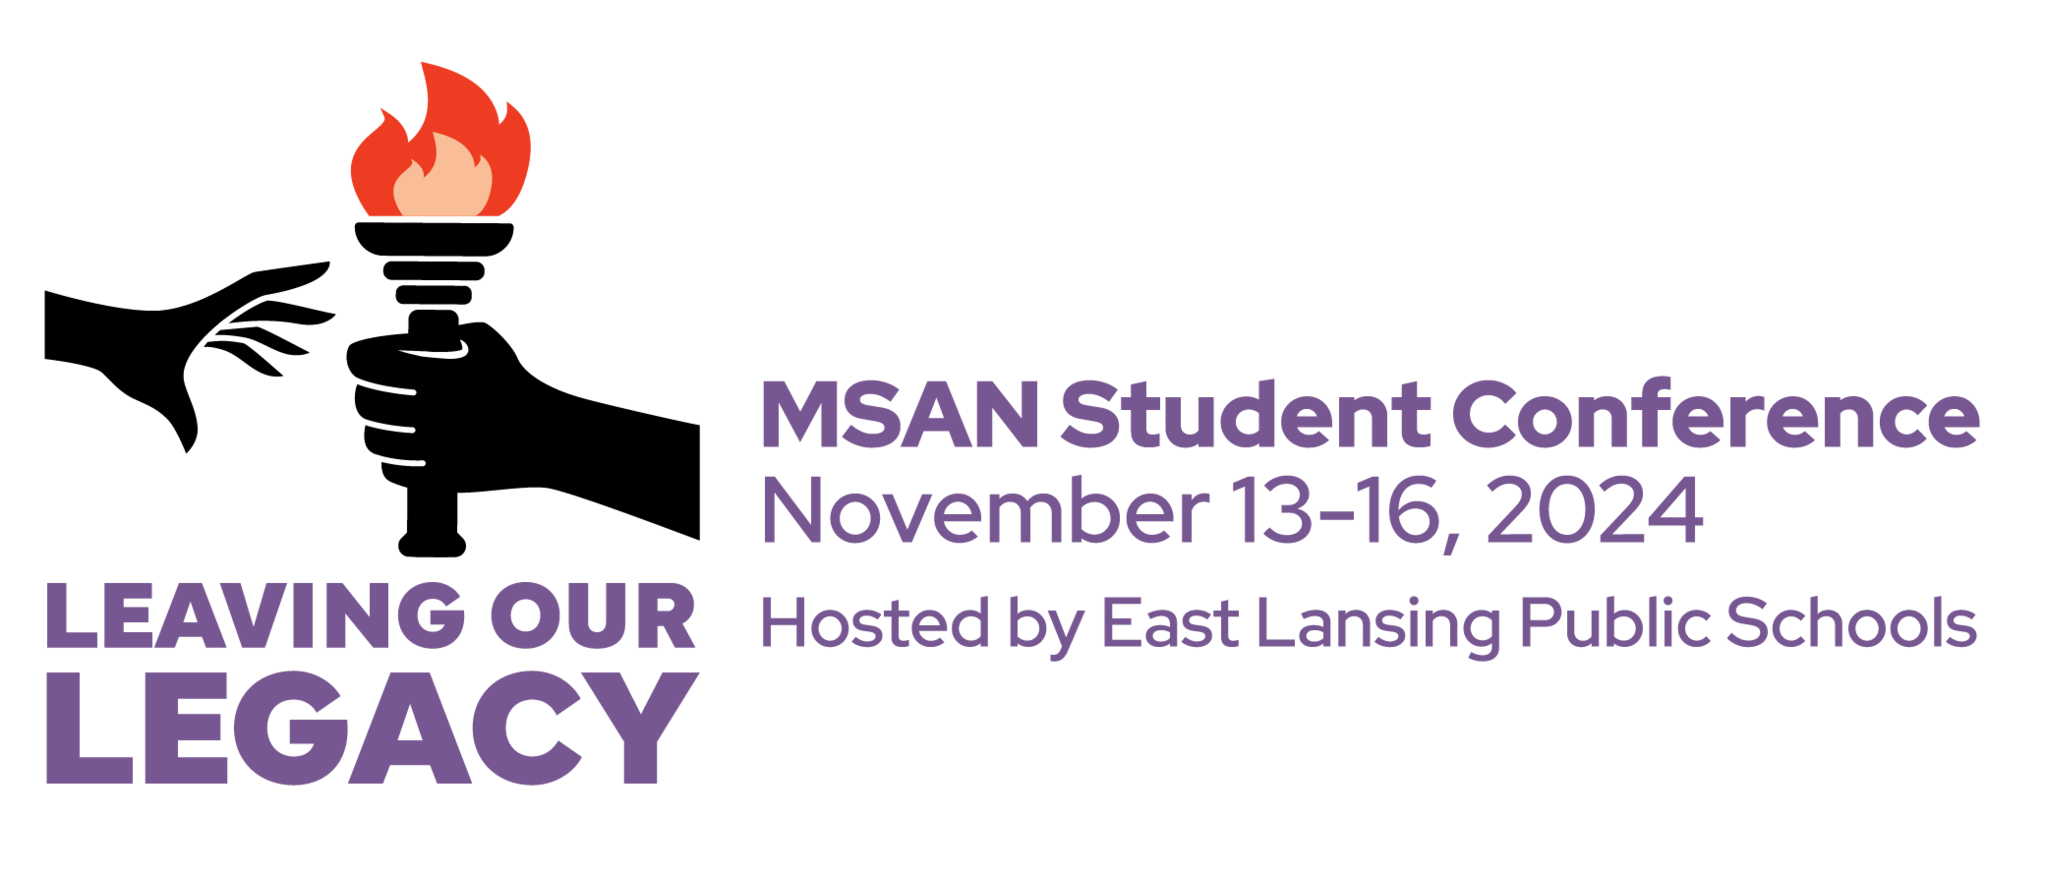 picture of the 2024 msan student conference logo